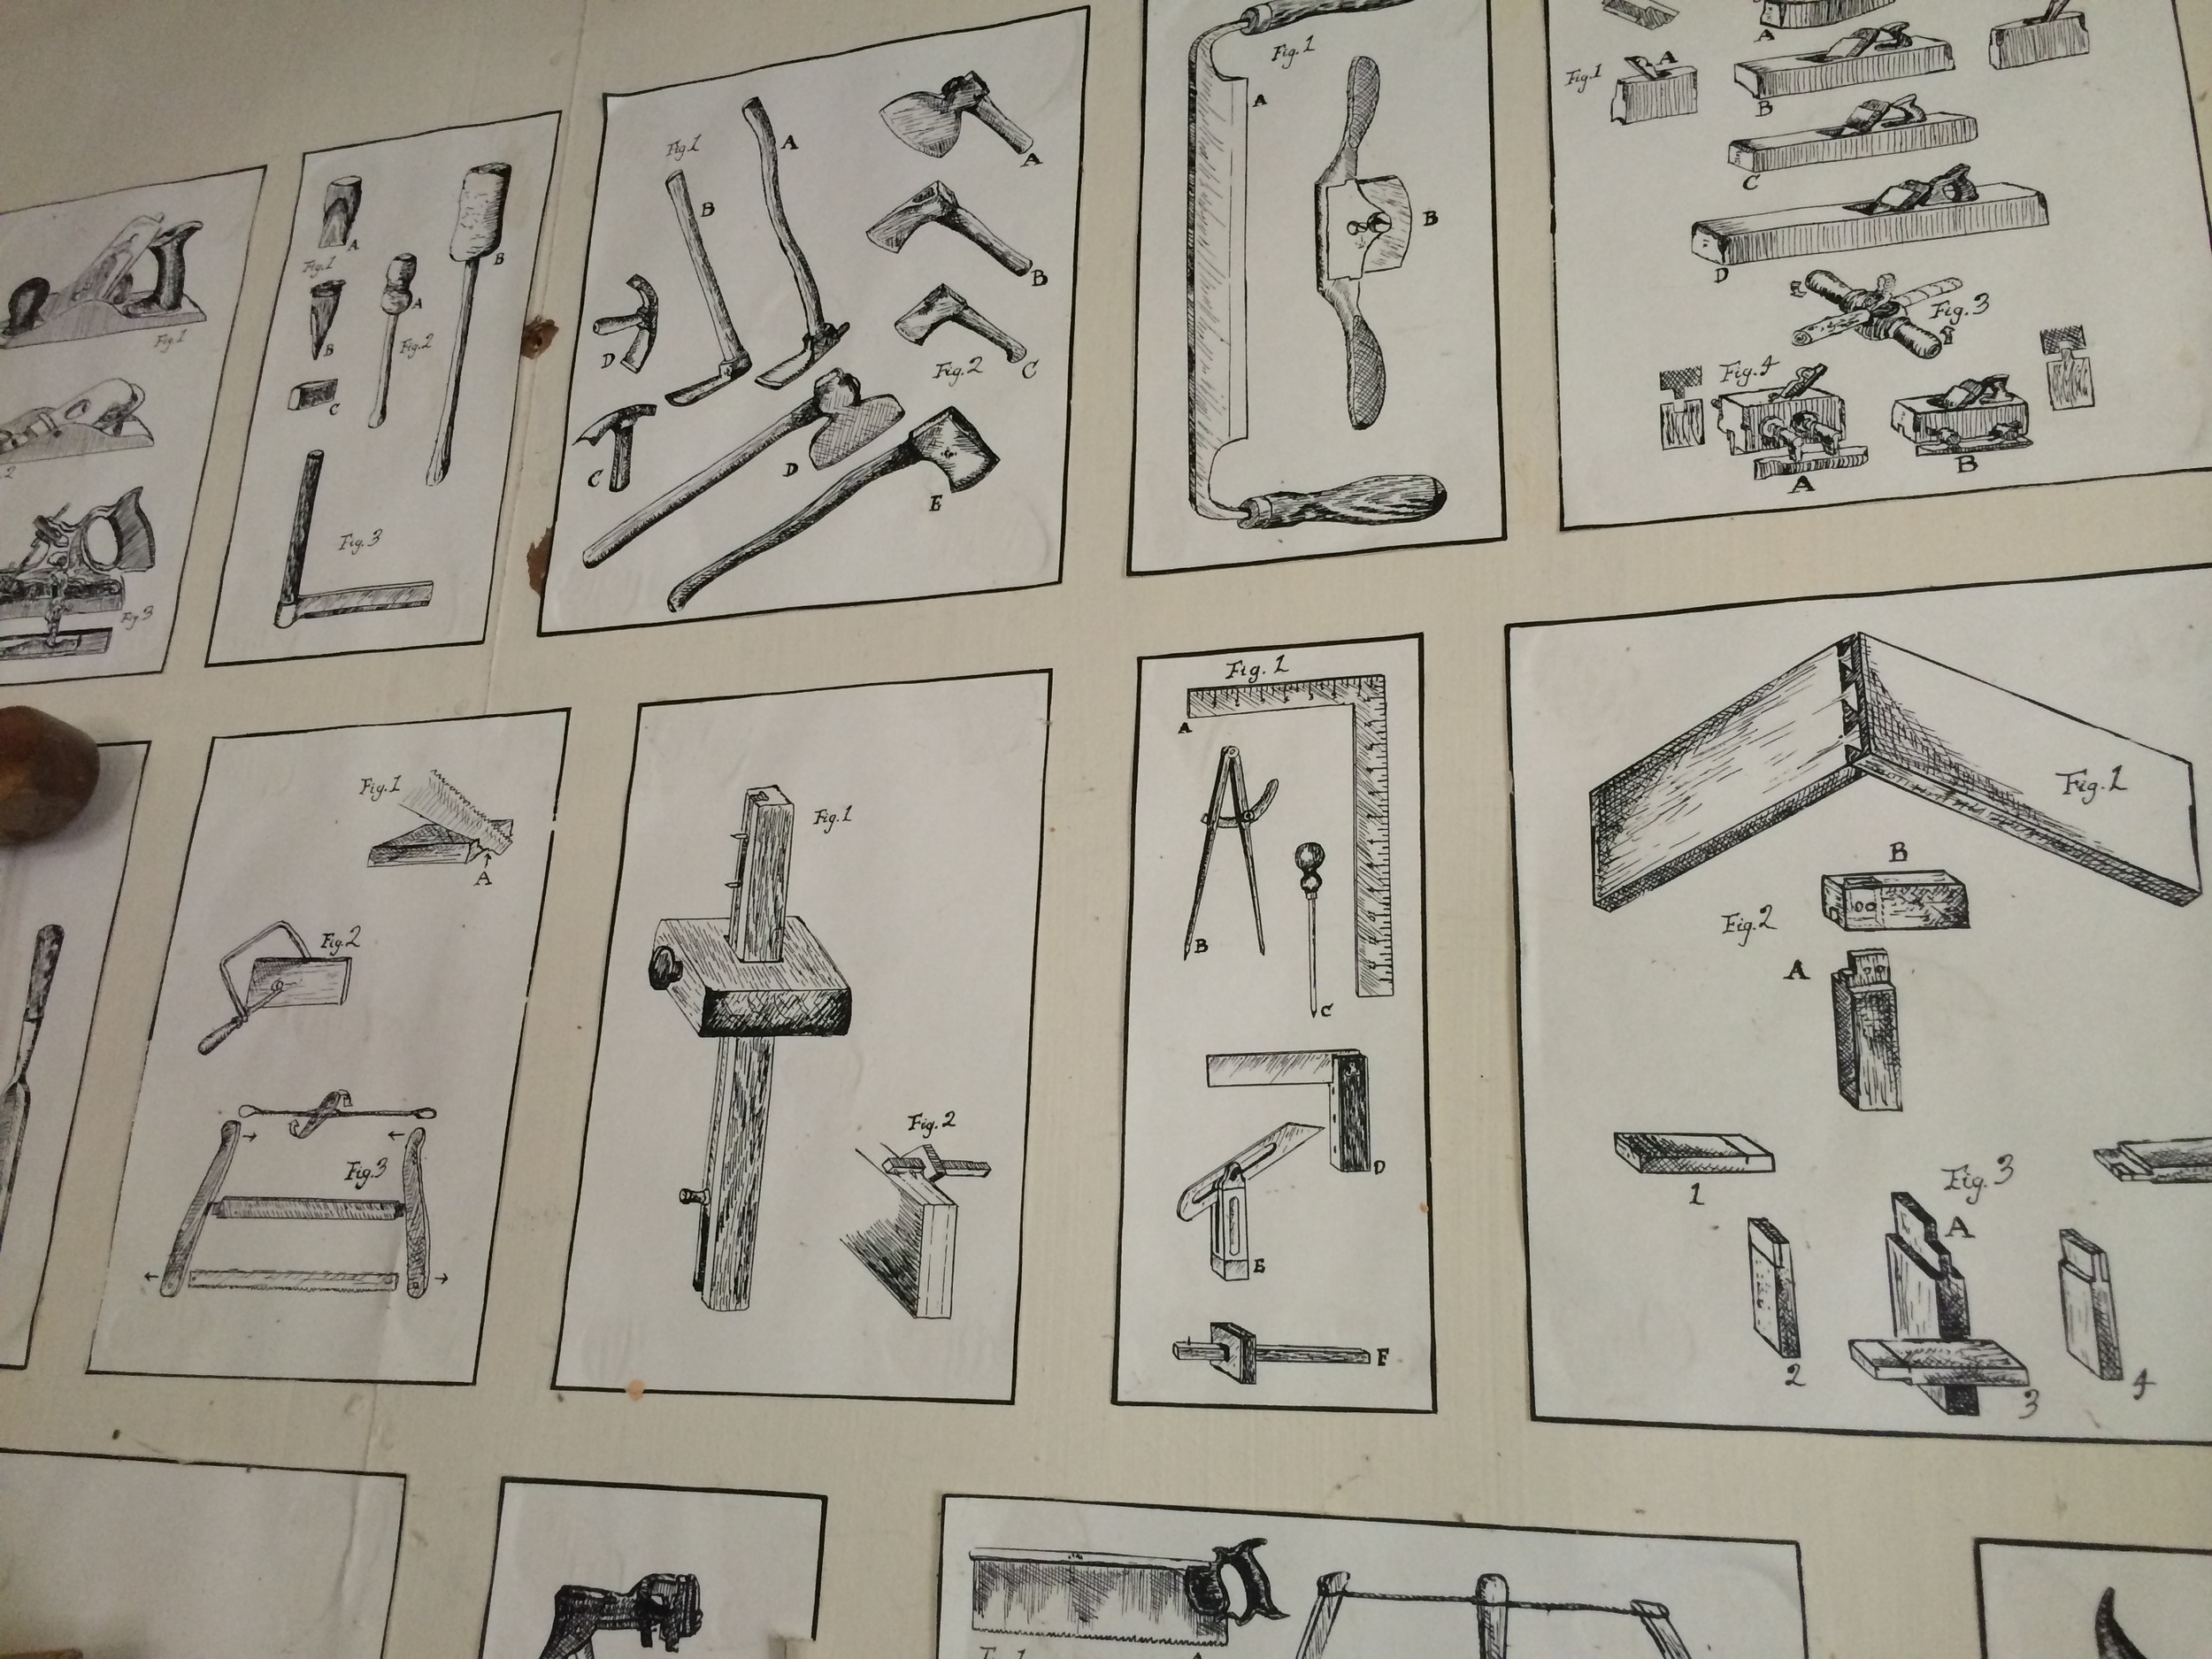 Cullen's drawings in his shop